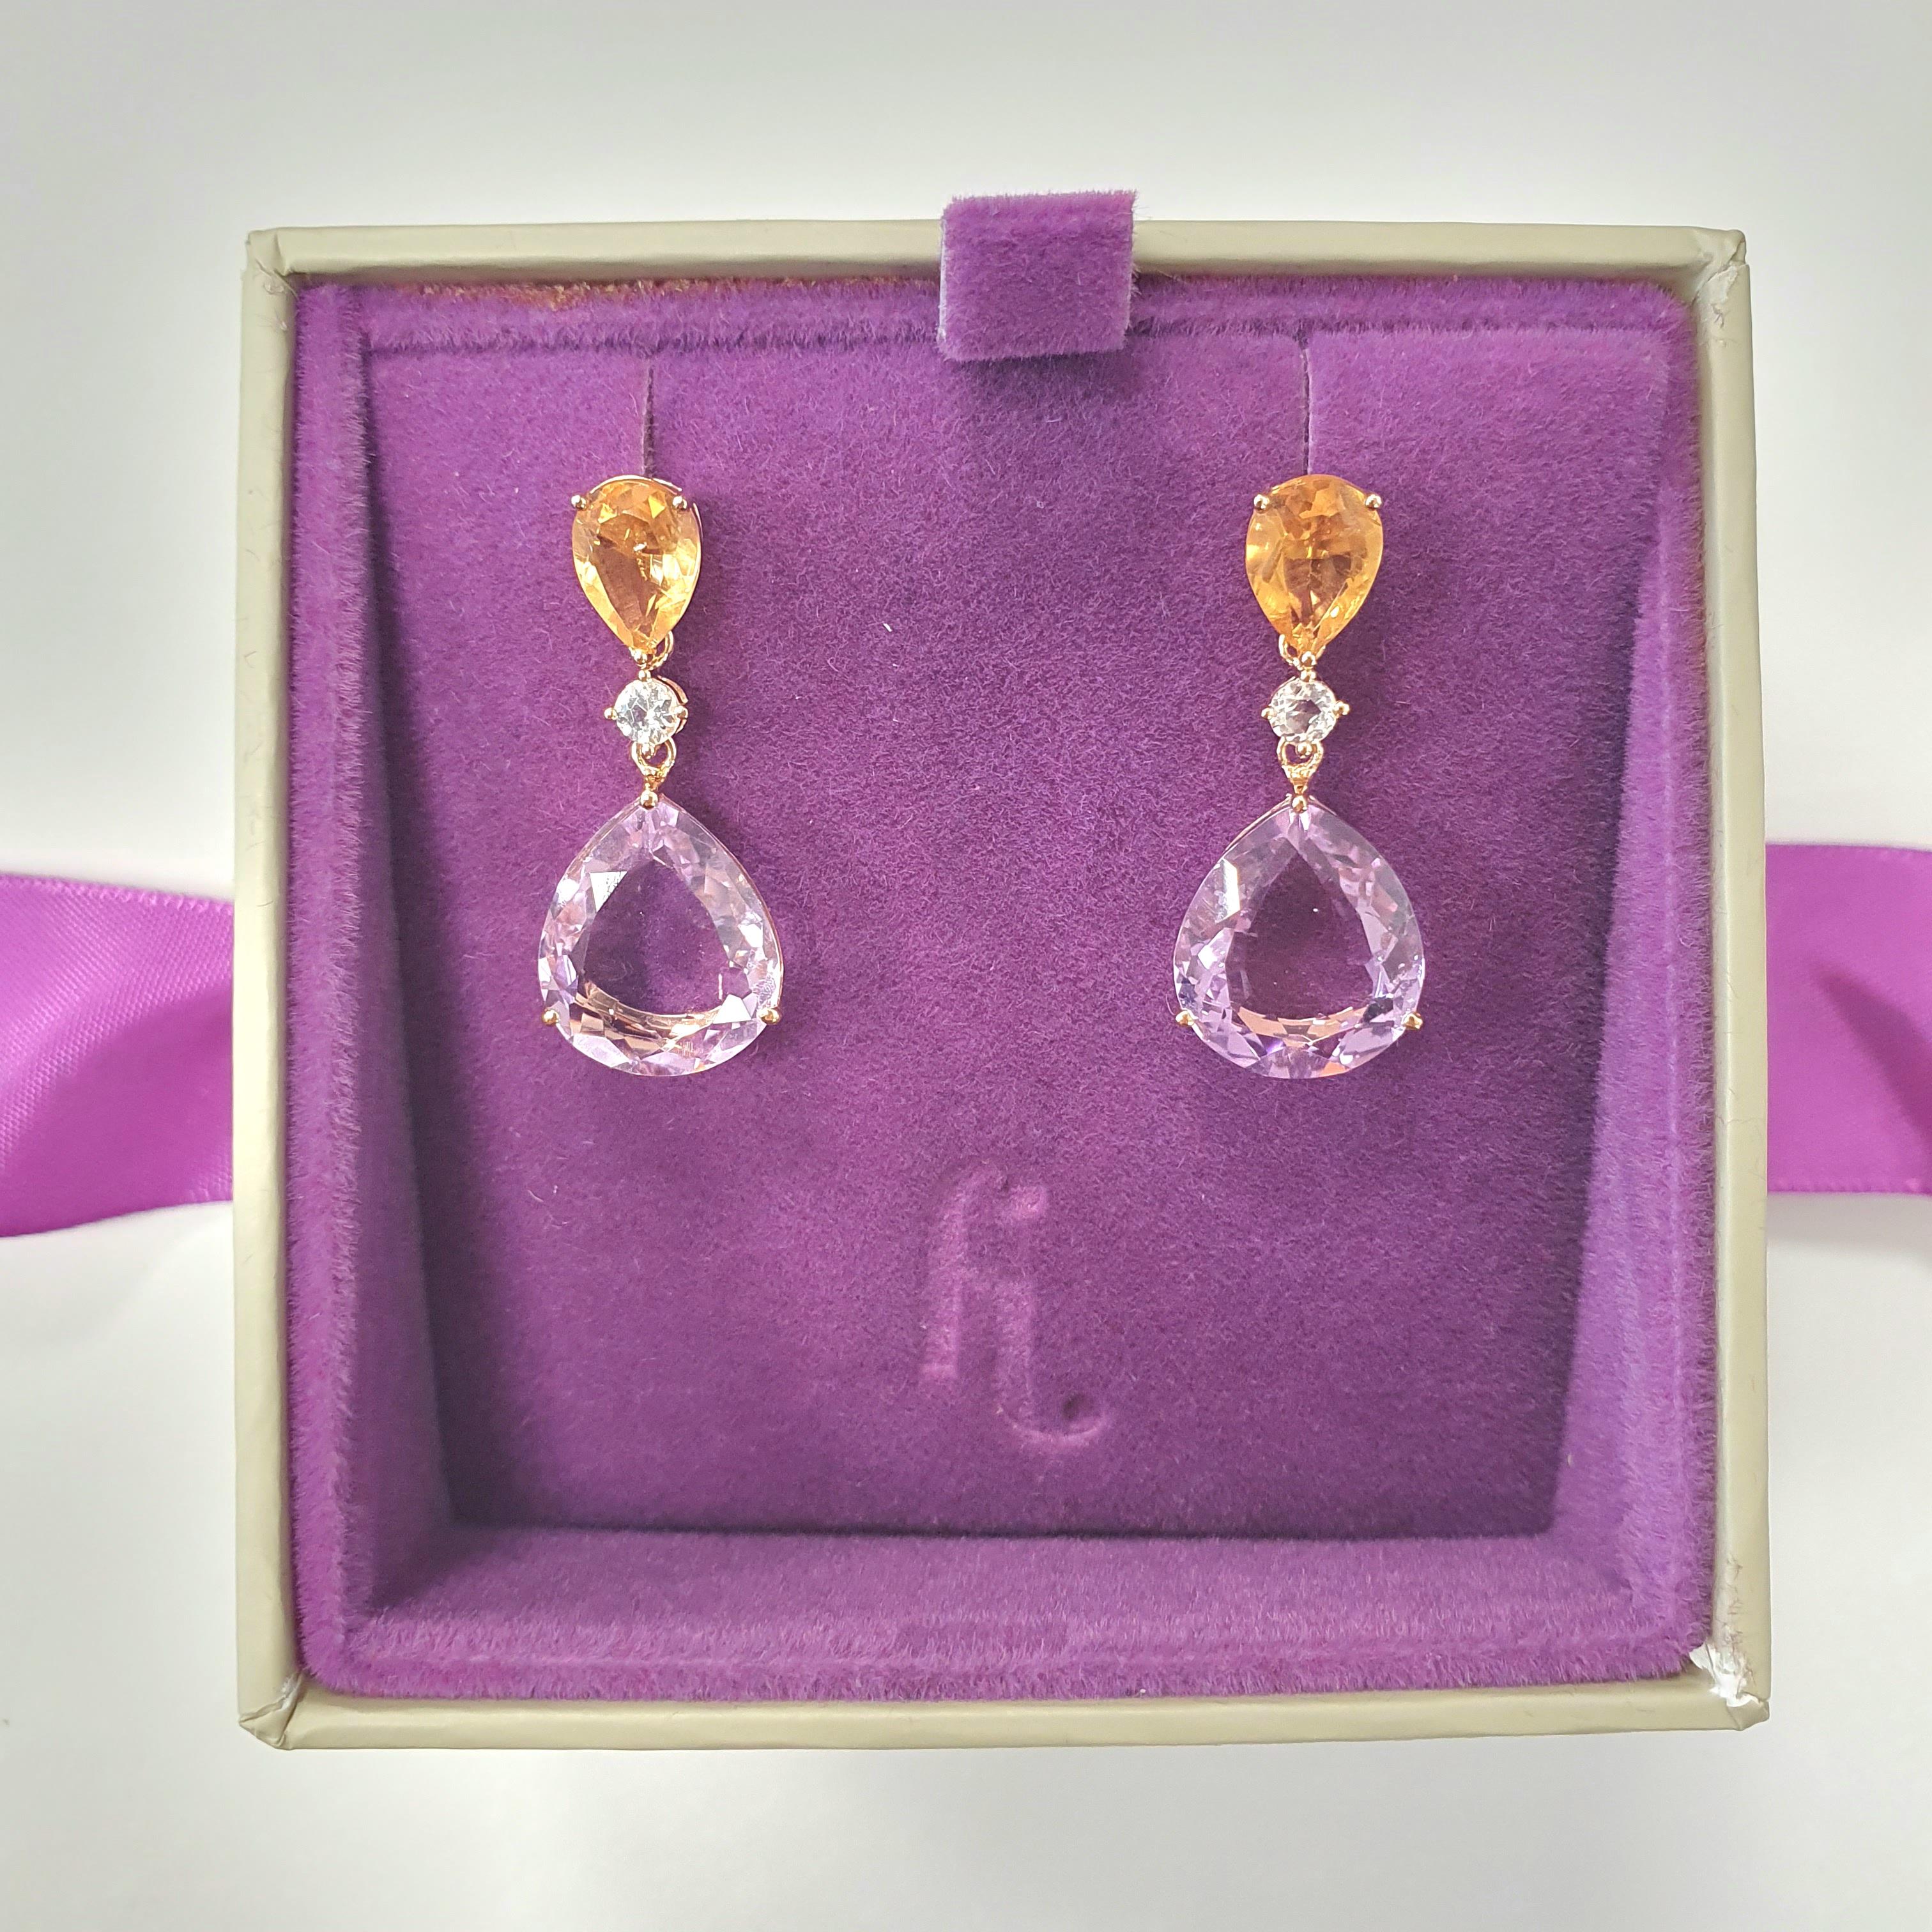 Contemporary Fei Liu Pear-Cut Citrine, Sapphire and Amethyst 18K Yellow Gold Drop Earrings For Sale